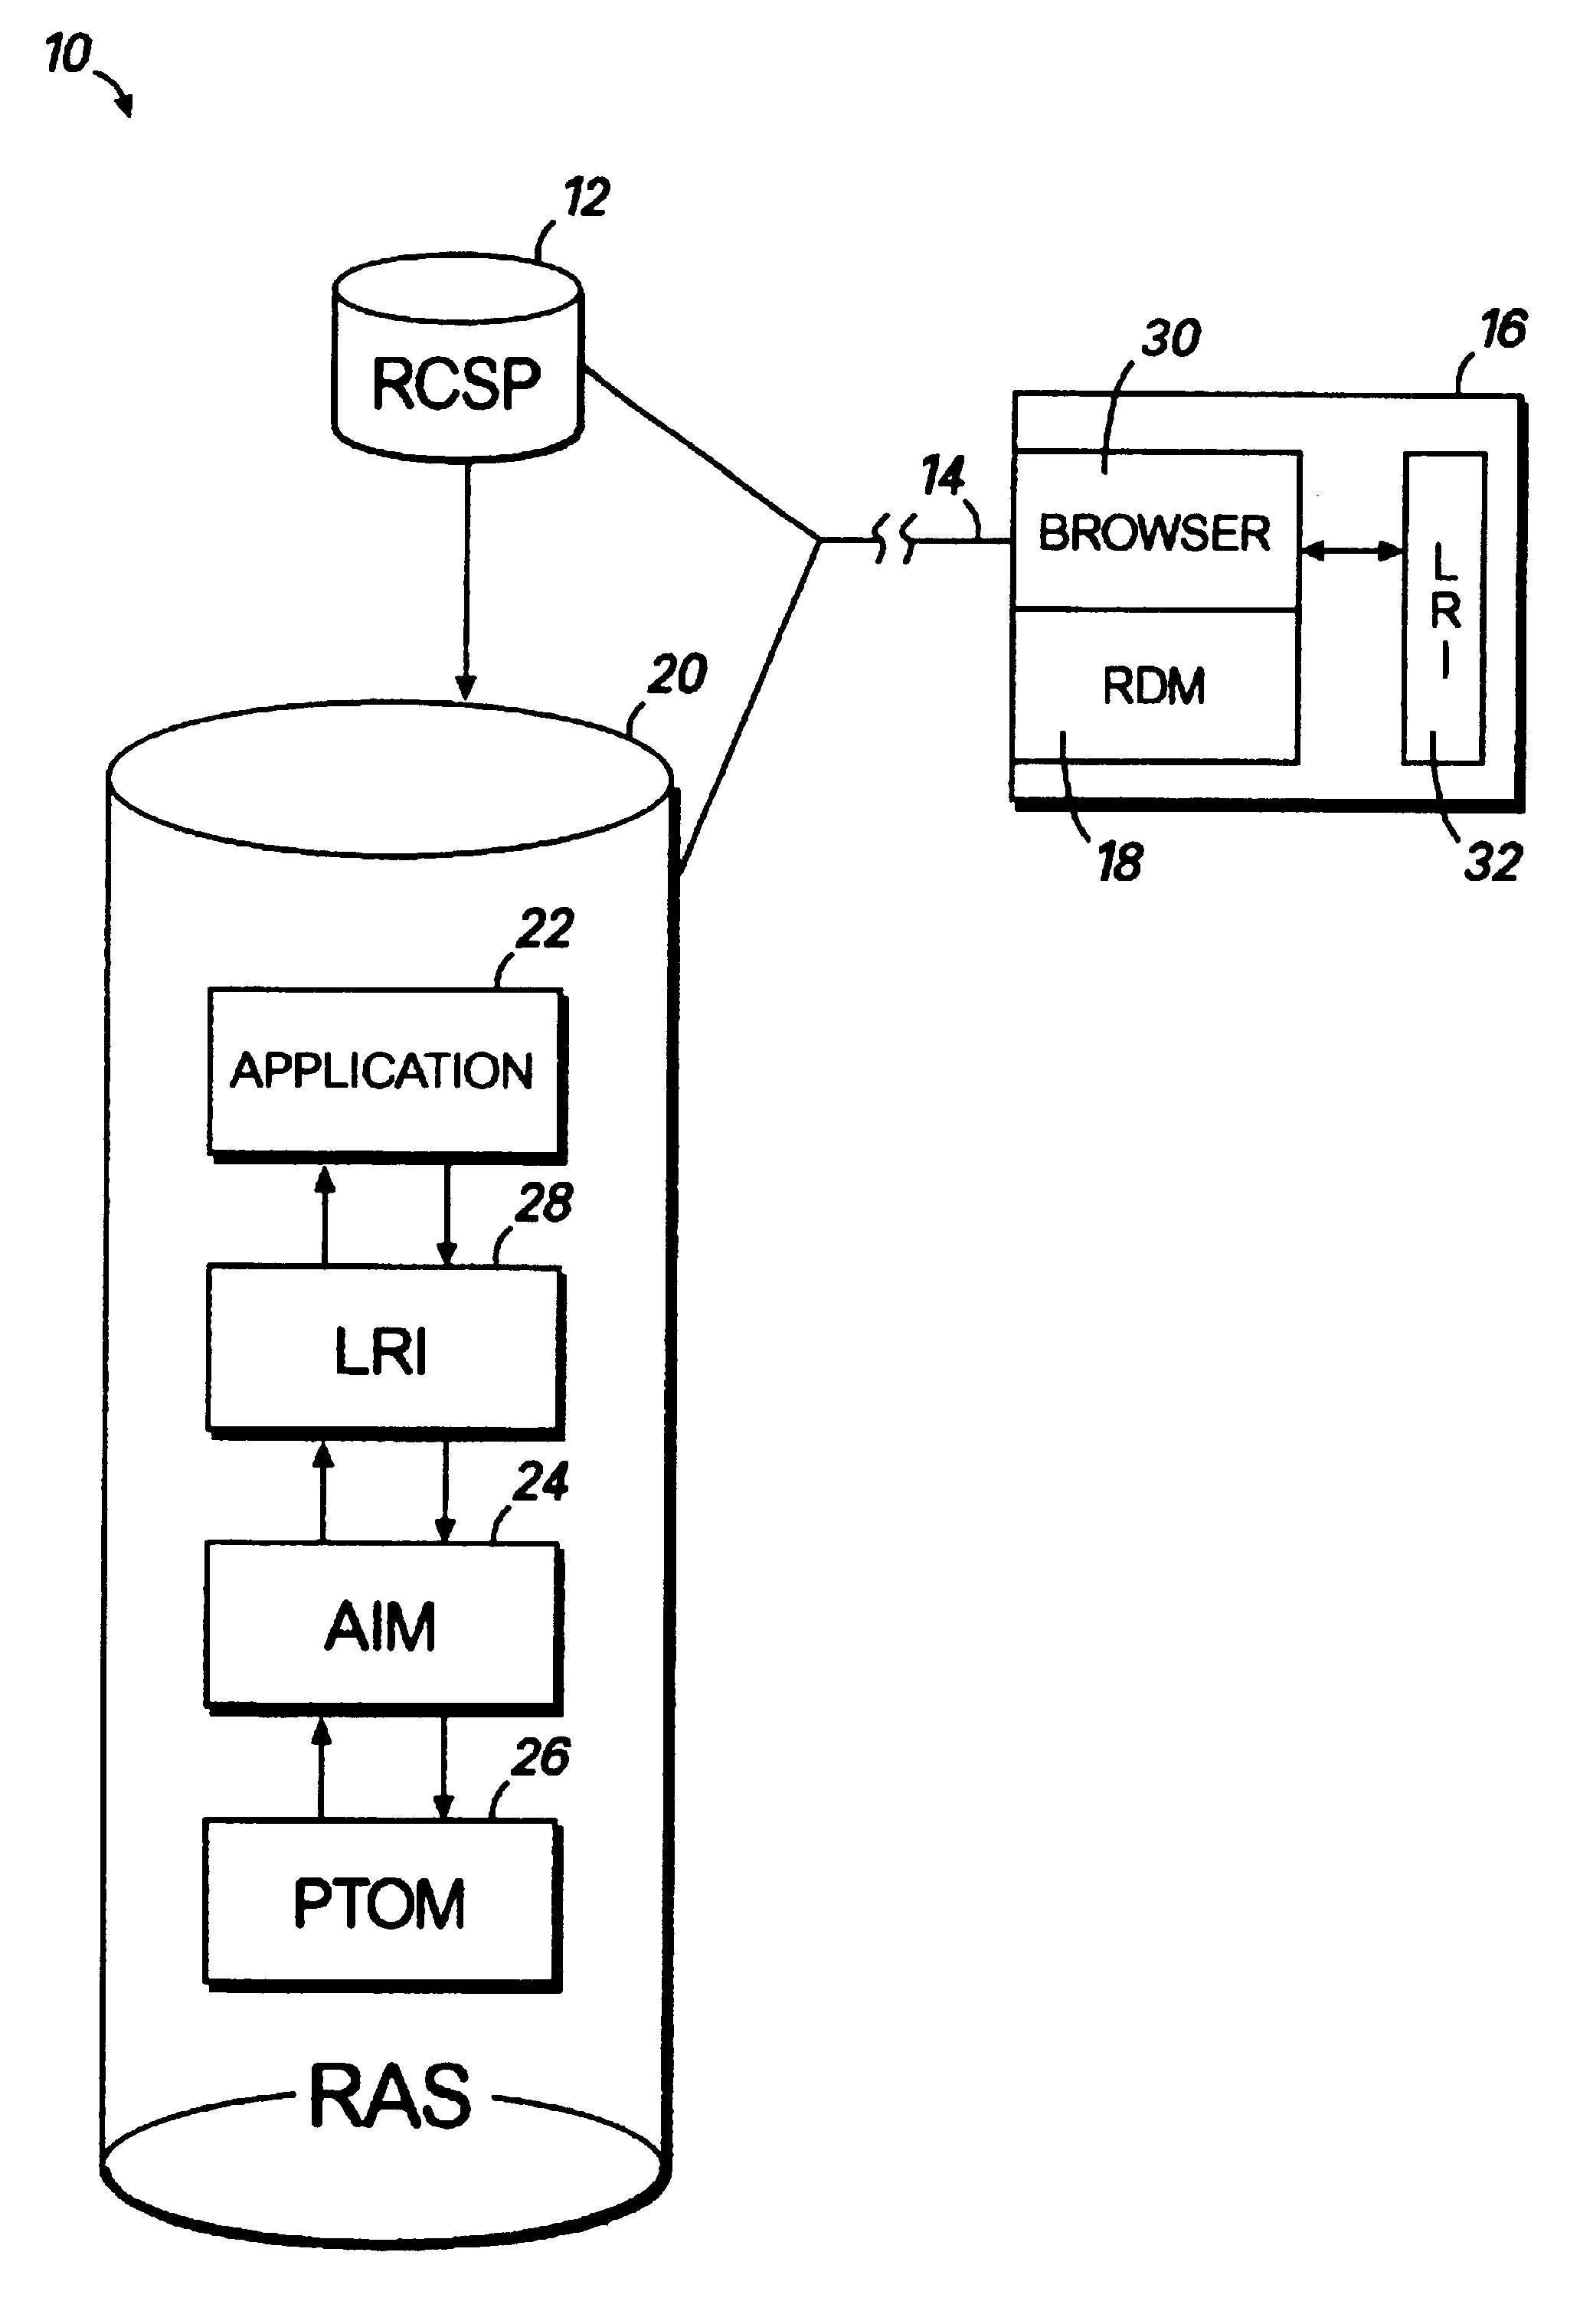 Method and system for on demand downloading of module to enable remote control of an application program over a network